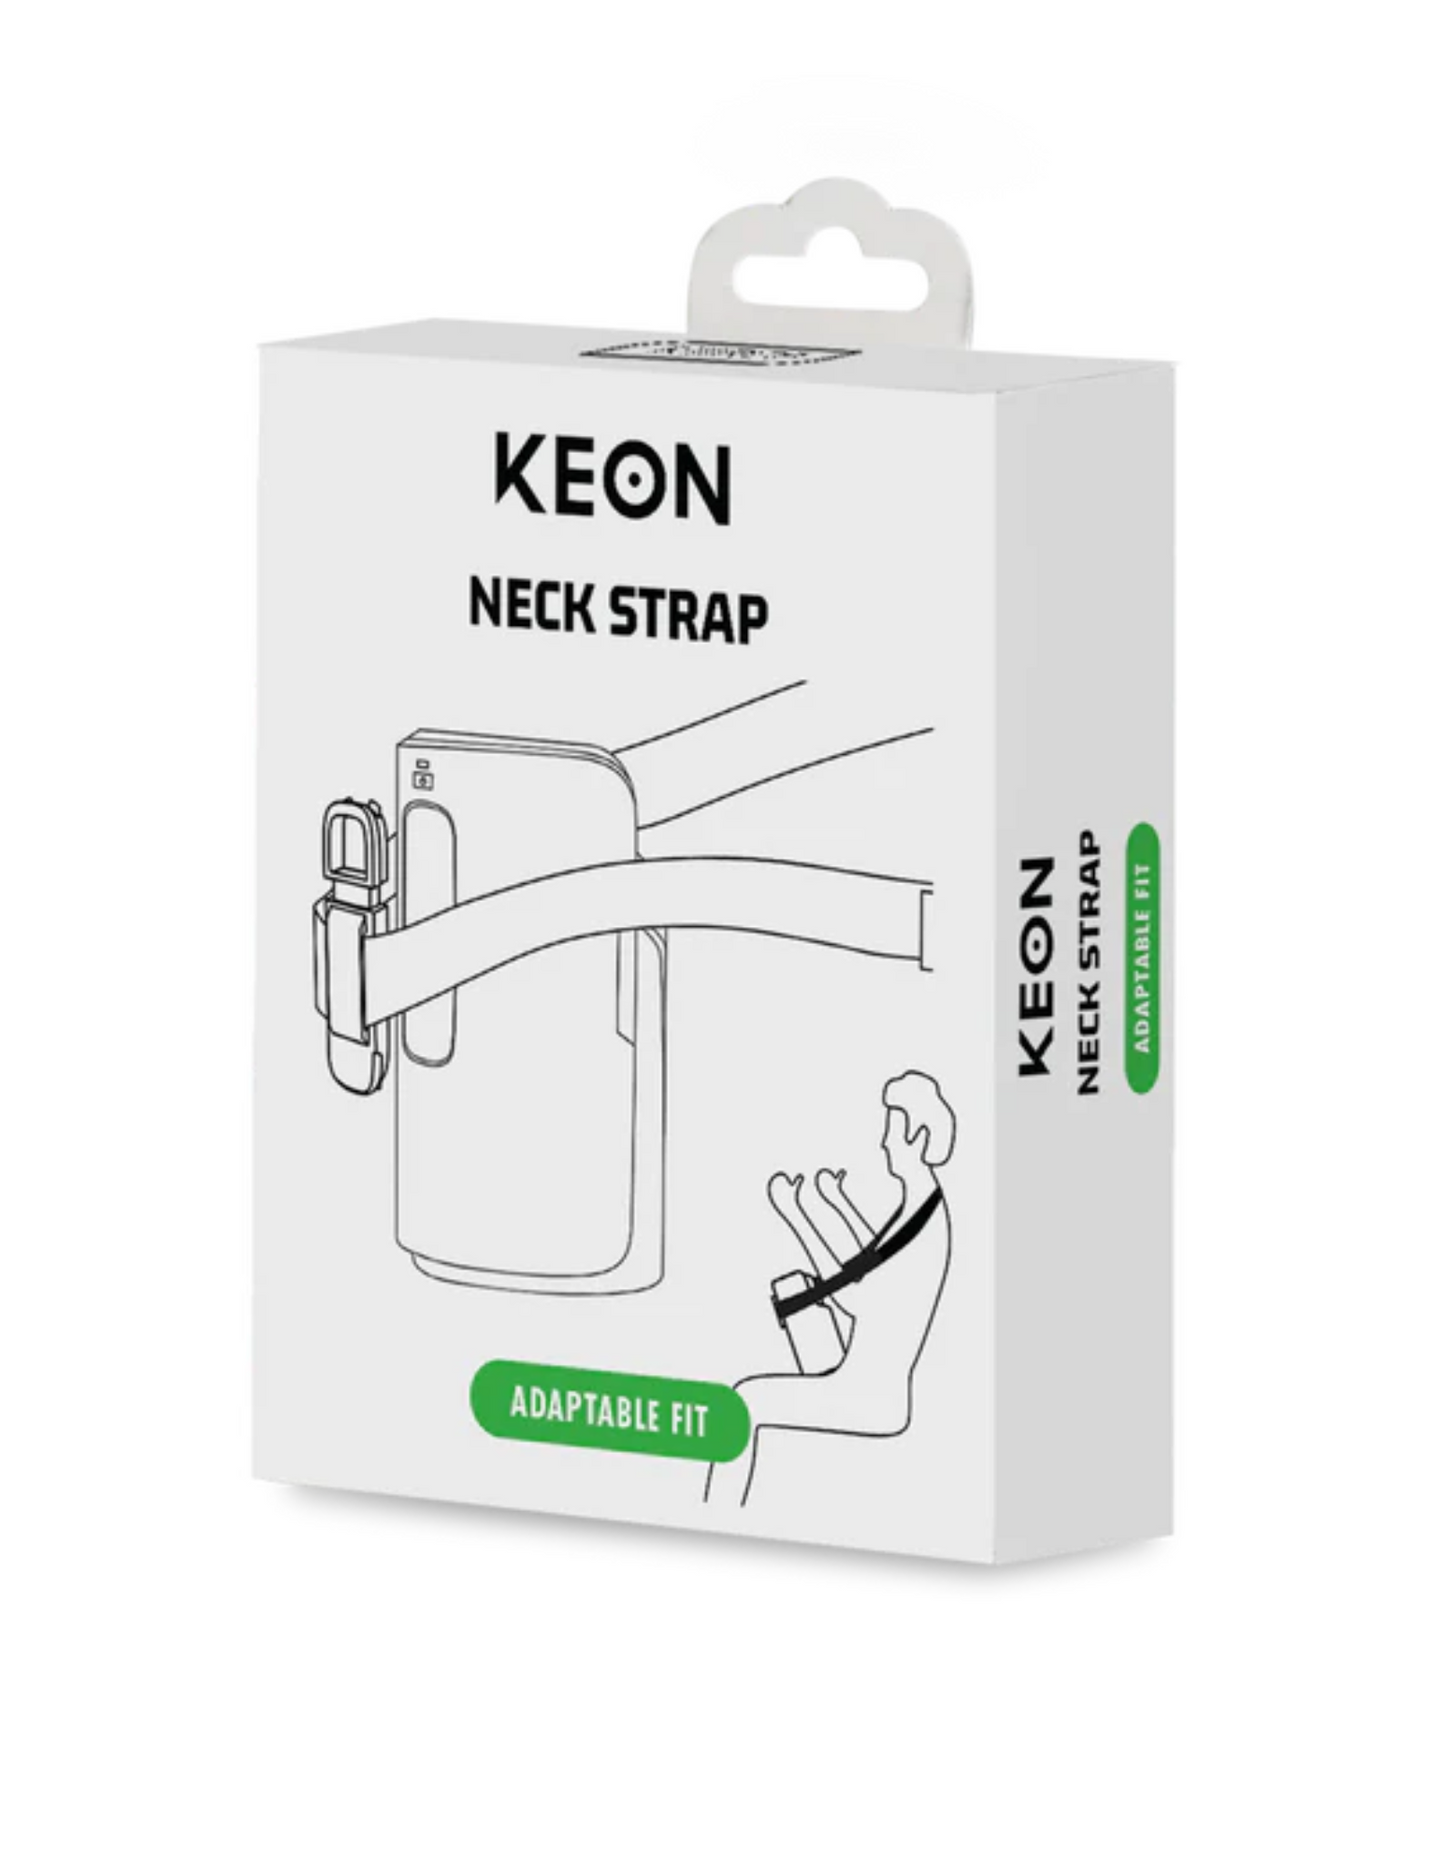 Photo of the front of the box for the Keon Neck Strap Accessory by KiiRoo.